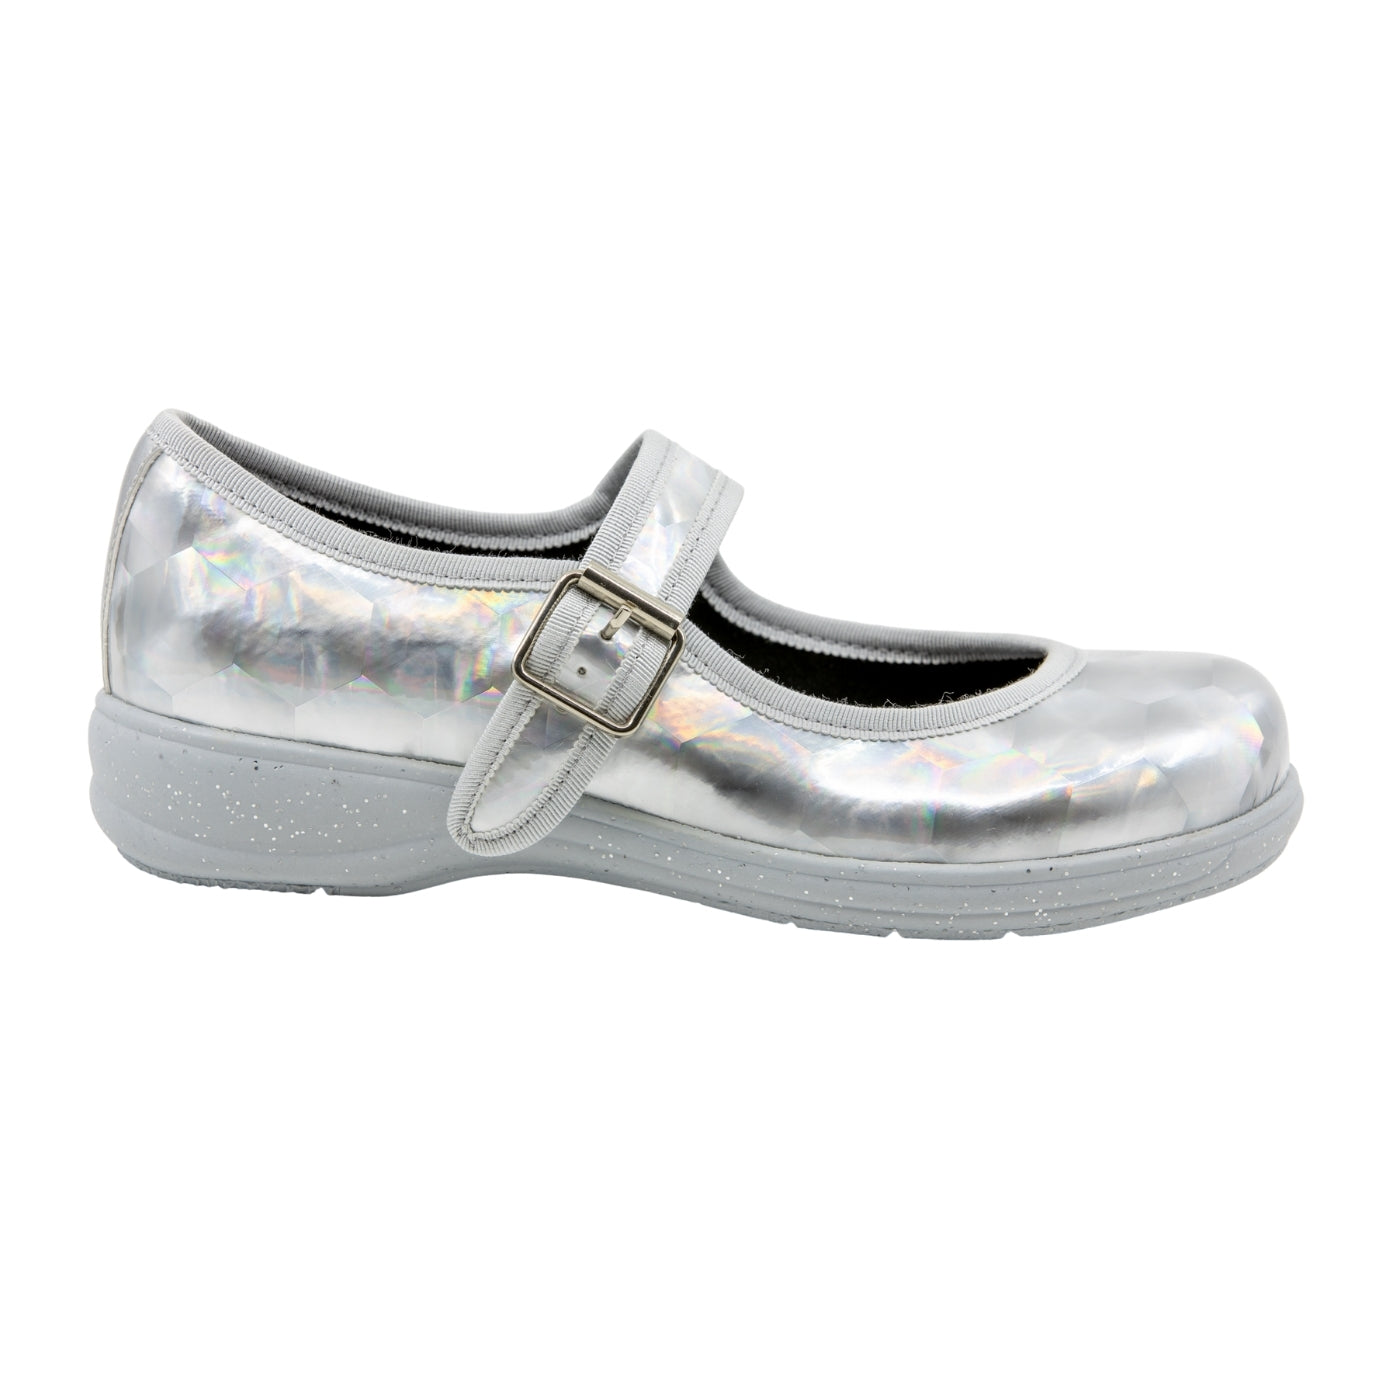 Robot Mary Janes by RainbowsAndFairies.com.au (Silver Holographic - Metallic - Sparkle Shoes - Buckle Shoes - Mismatched Shoes - Cute & Comfy) - SKU: FW_MARYJ_ROBOT_ORG - Pic-04